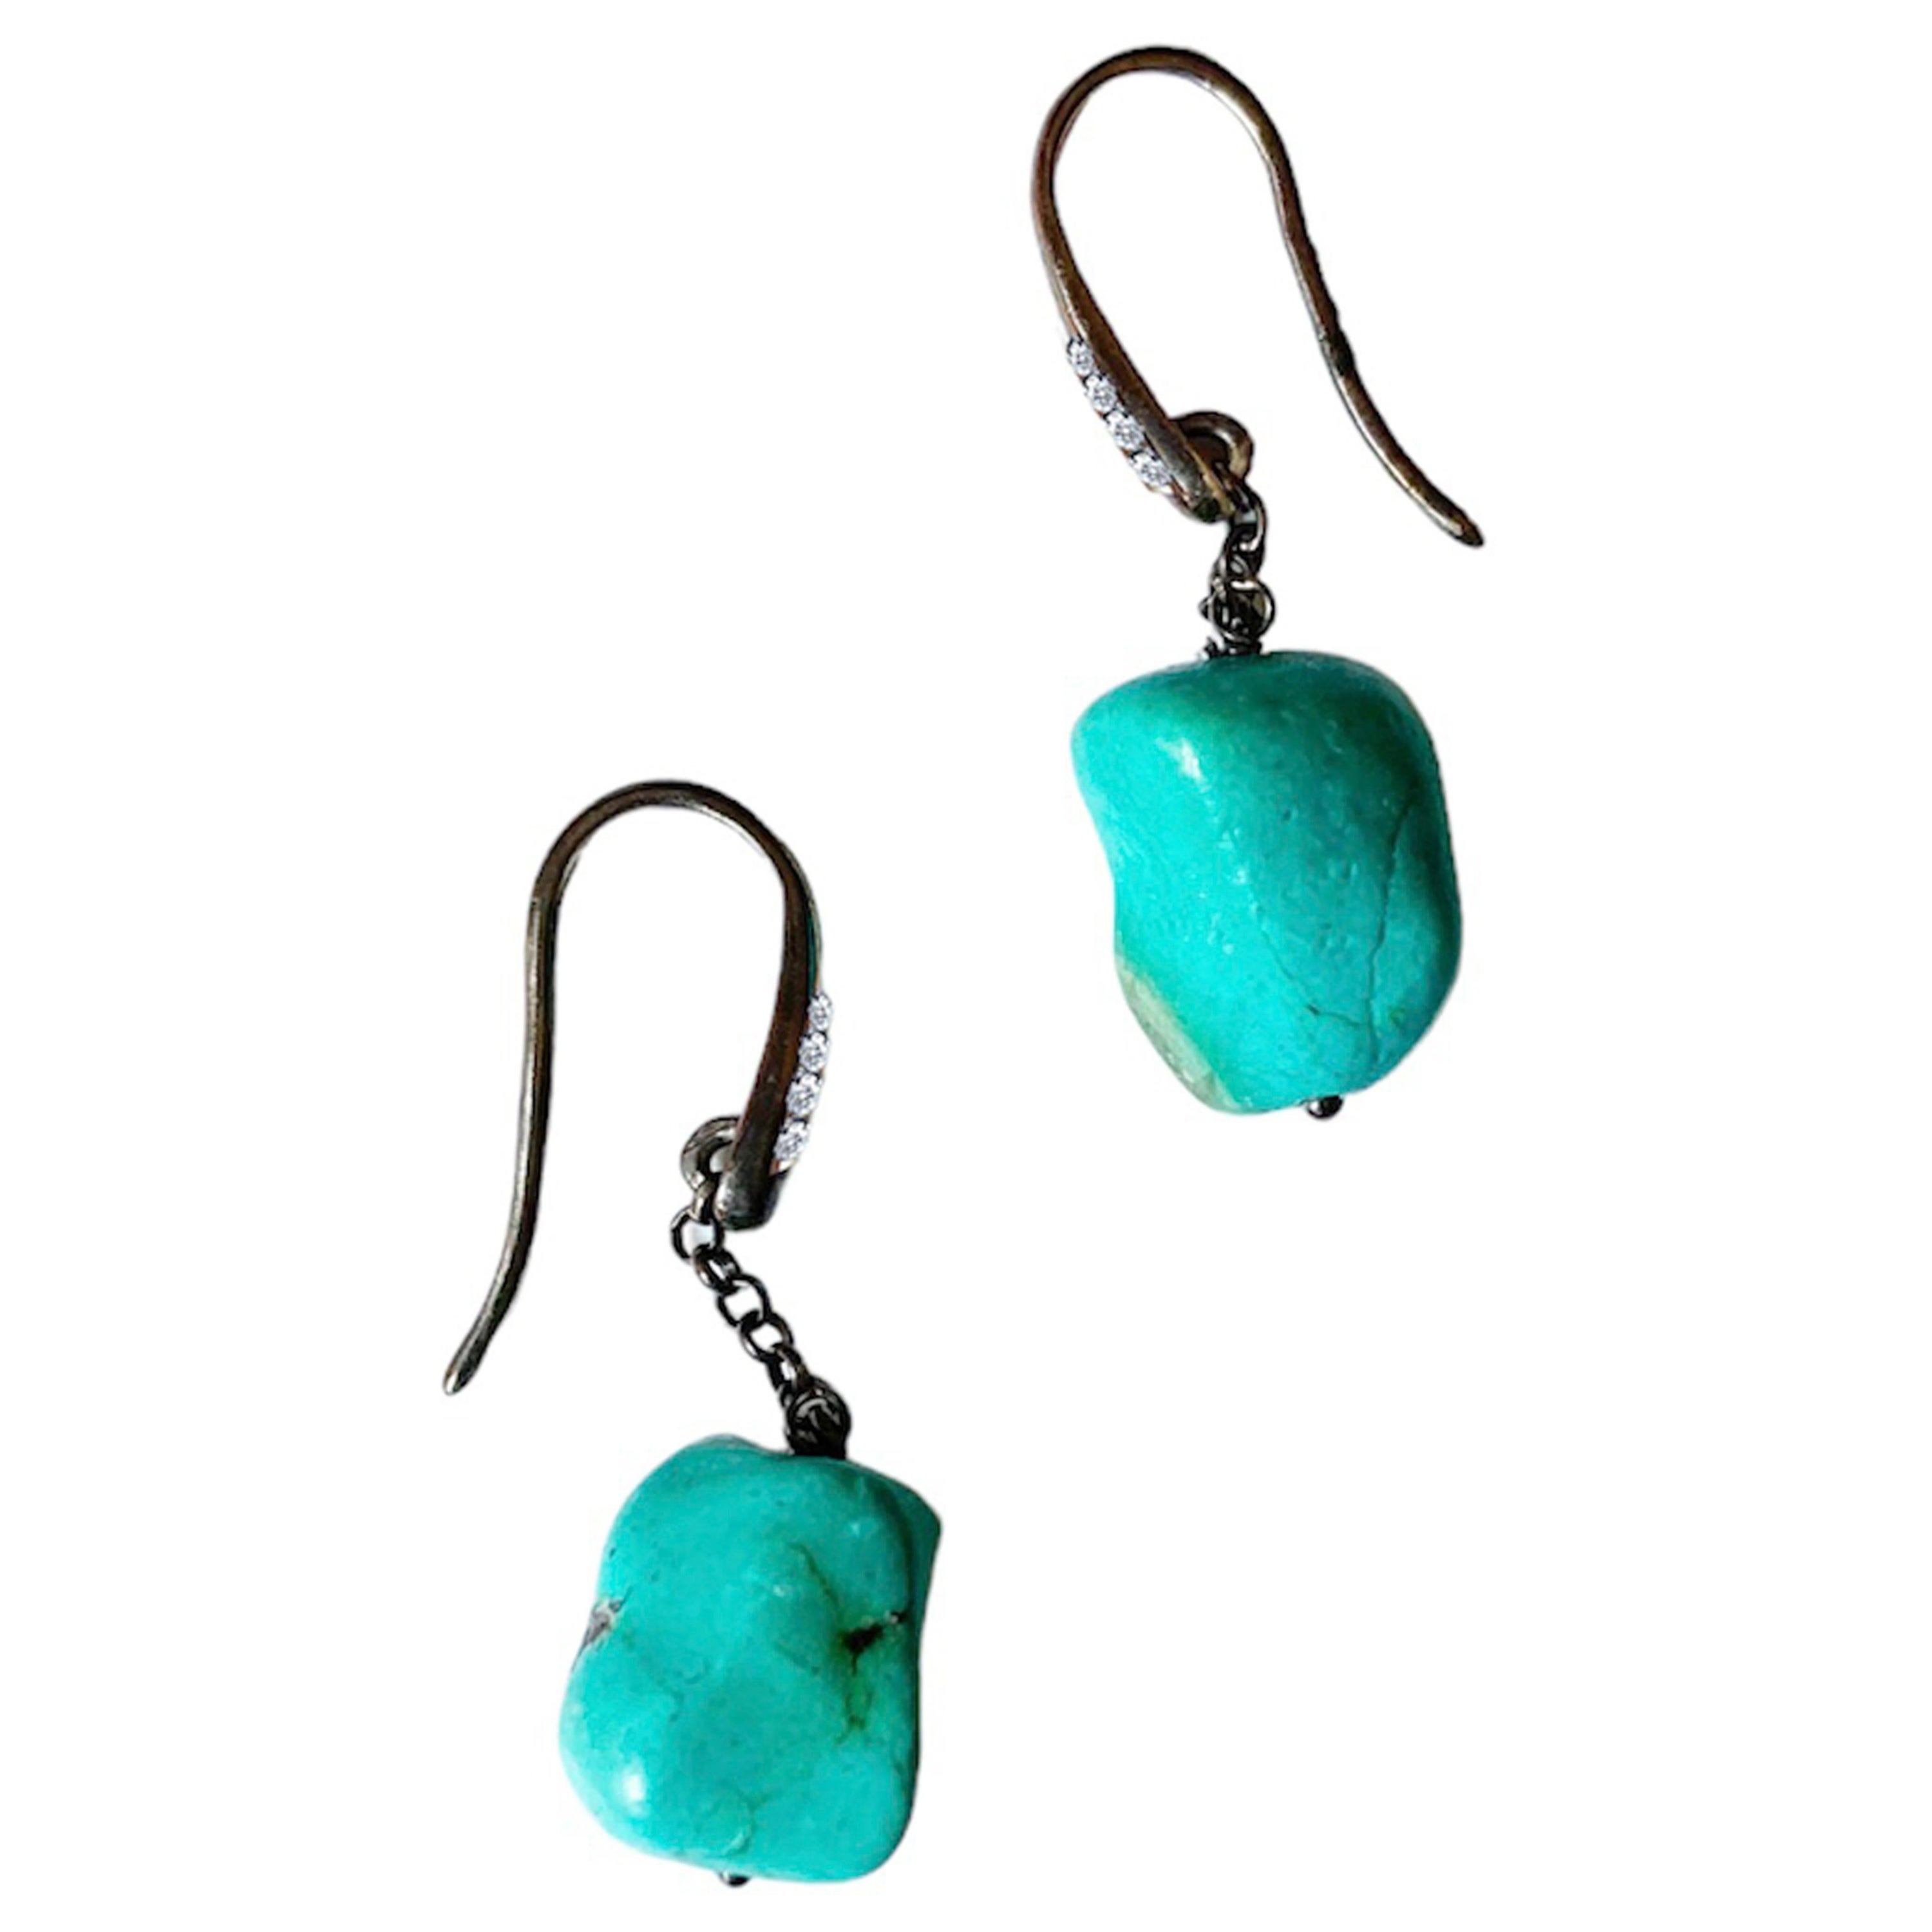 Bohemian Charm Handcrafted Turquoise and Gray Diamond Earrings